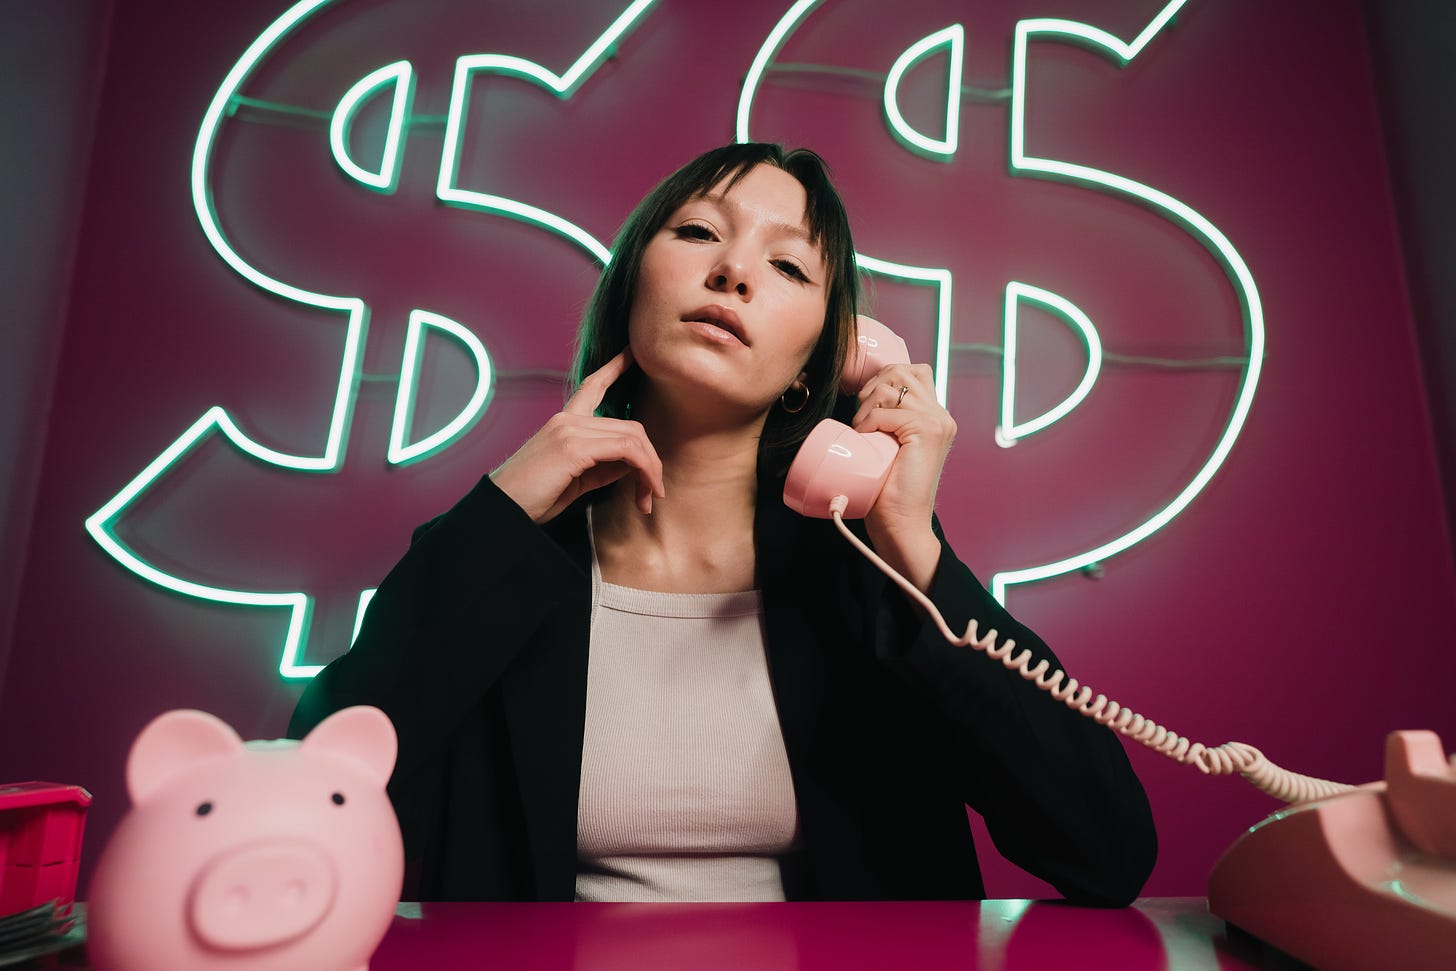 woman sitting in front of a neon dollar sign. She is holding a pink corded phone